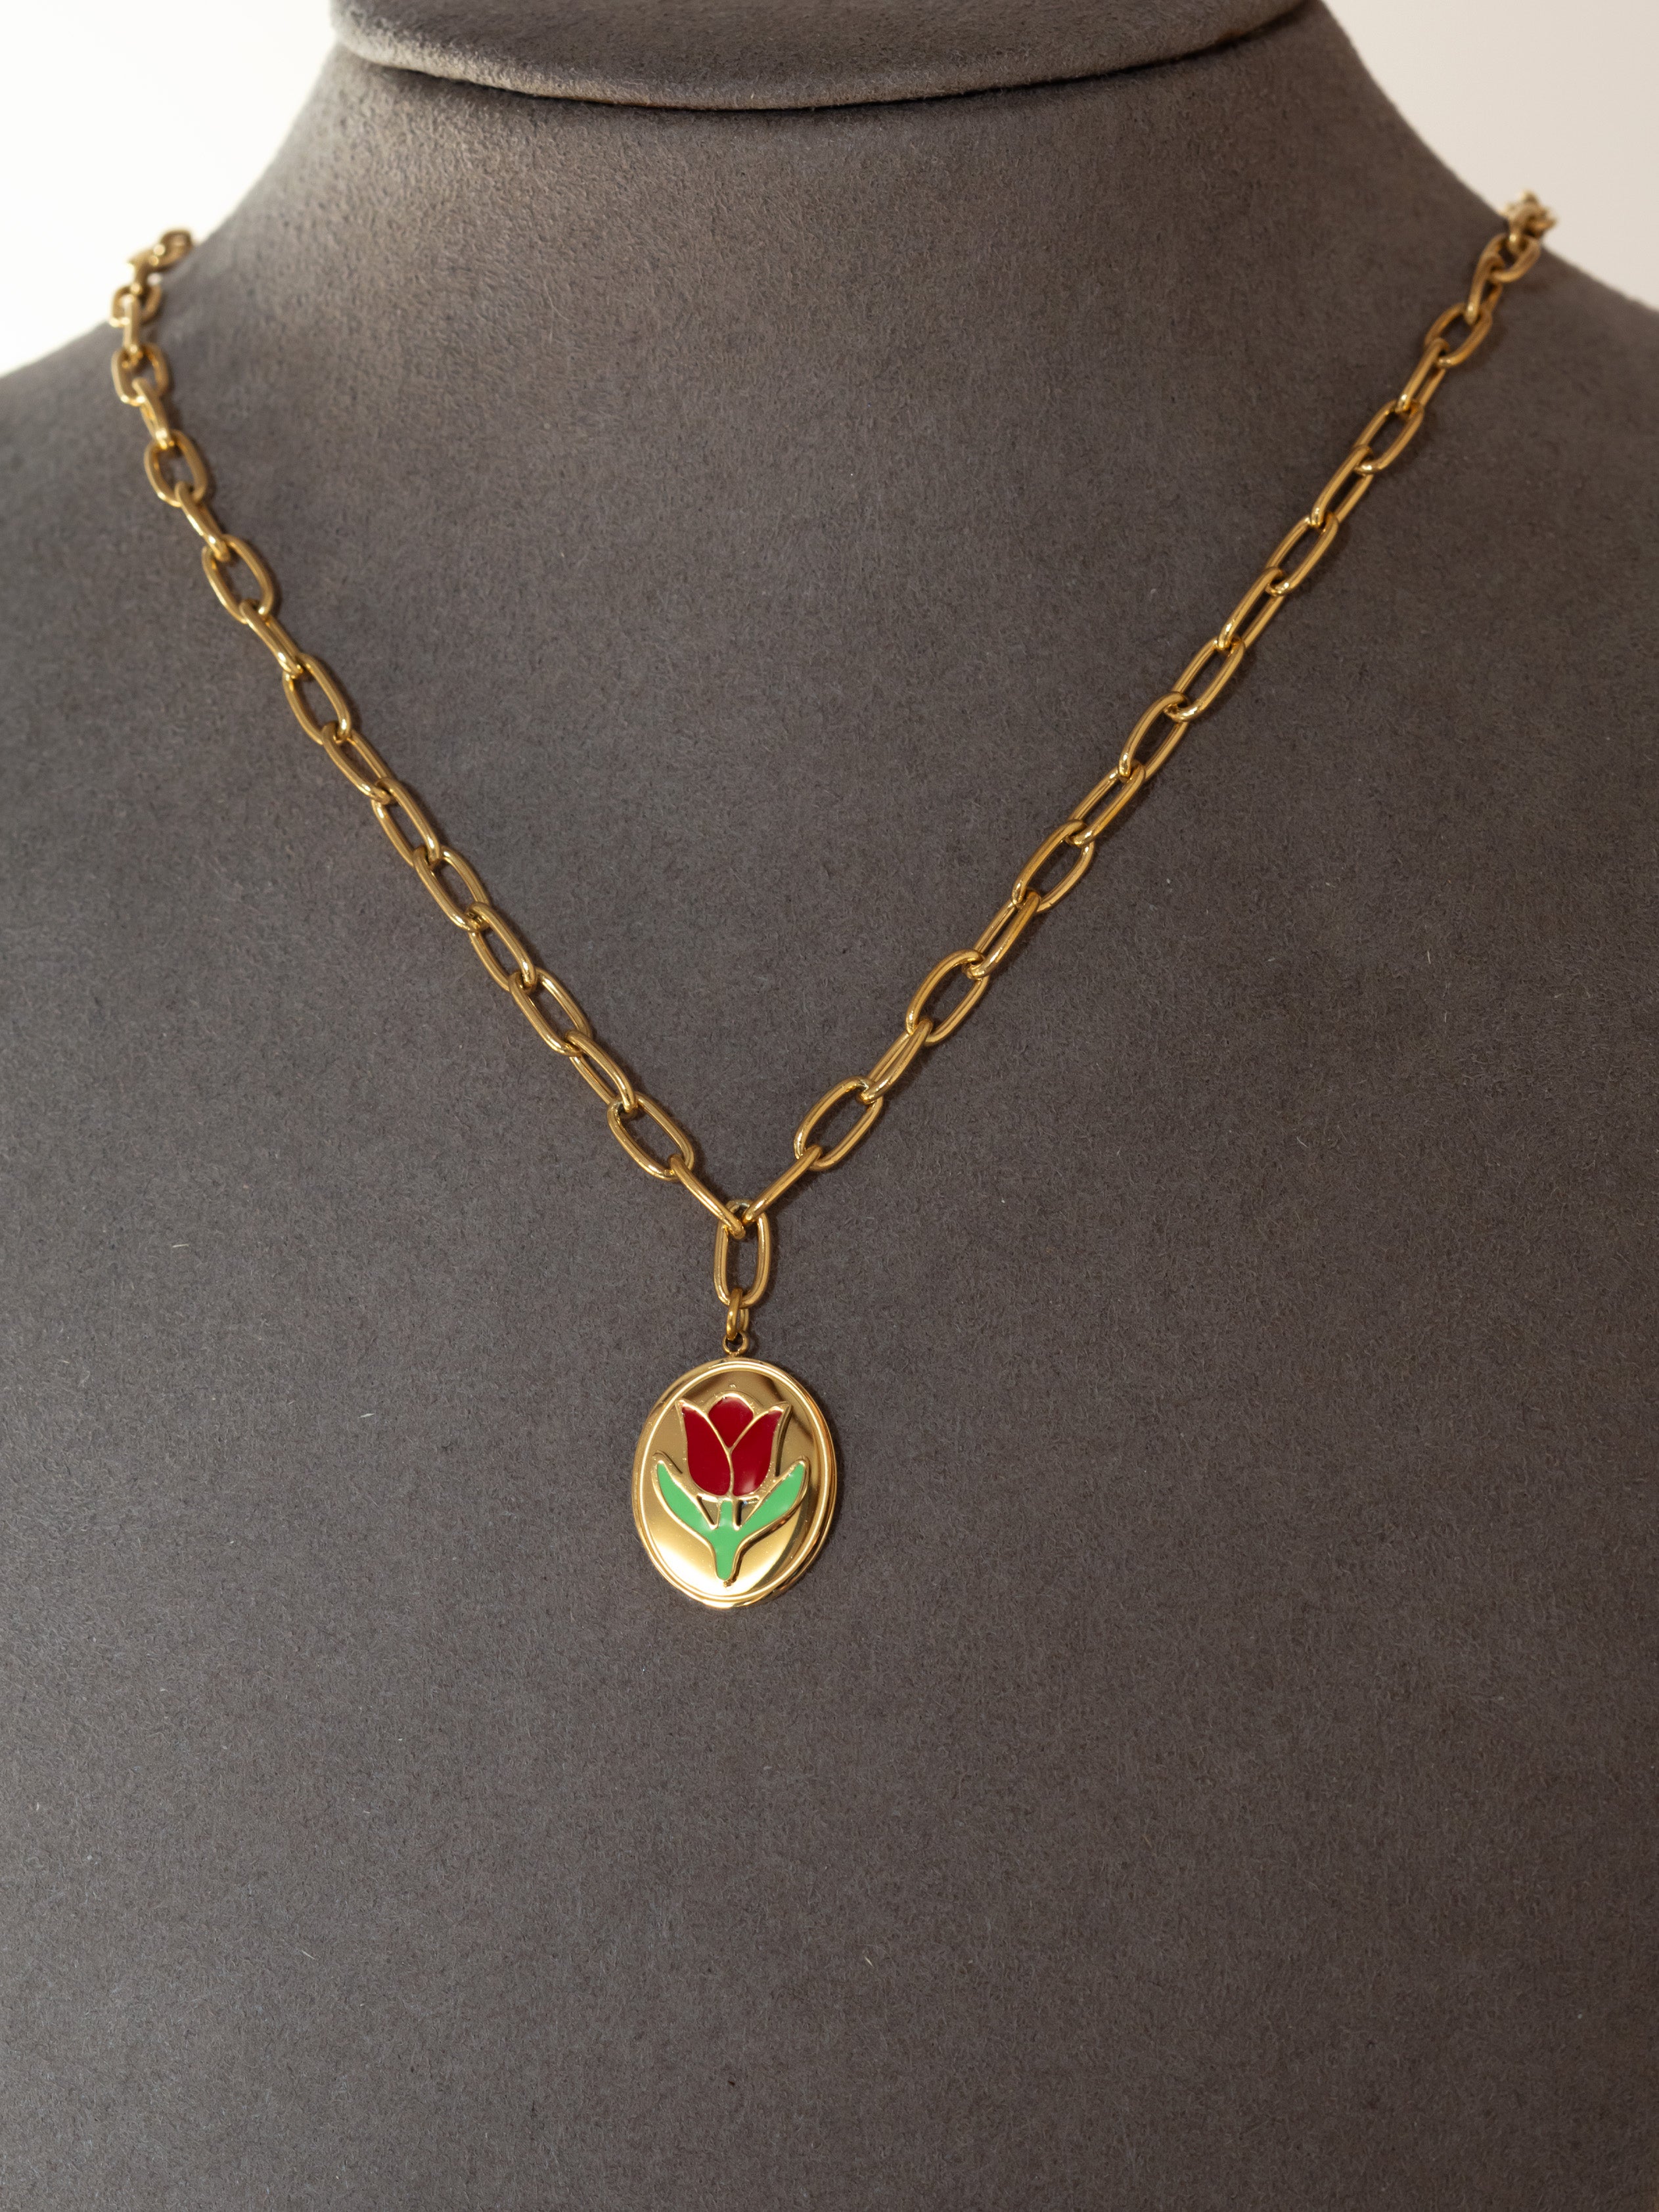 Gold Link Chain Necklace With Enamel Tulip Coin